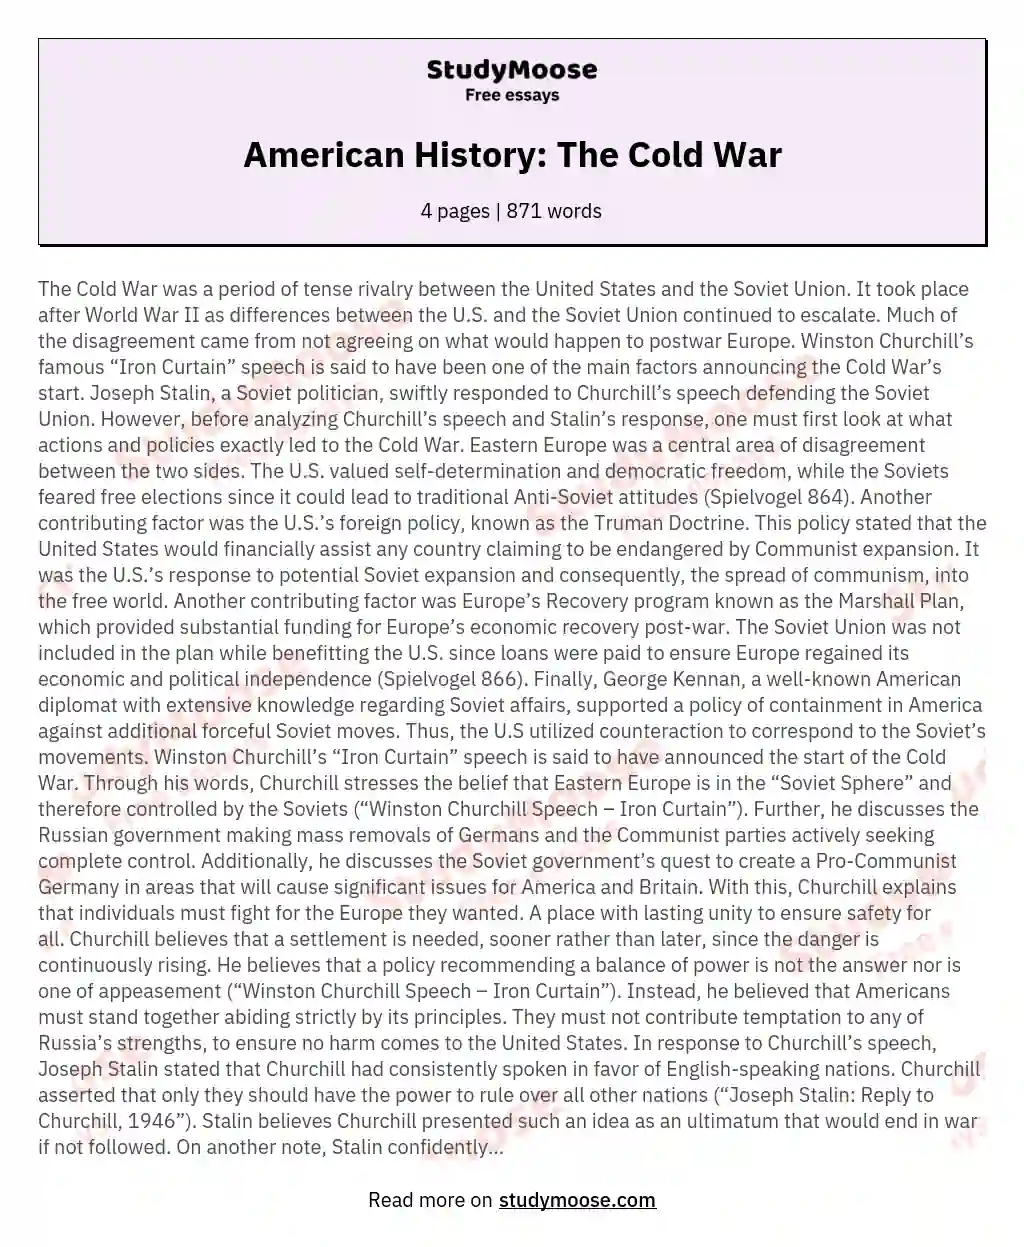 American History: The Cold War